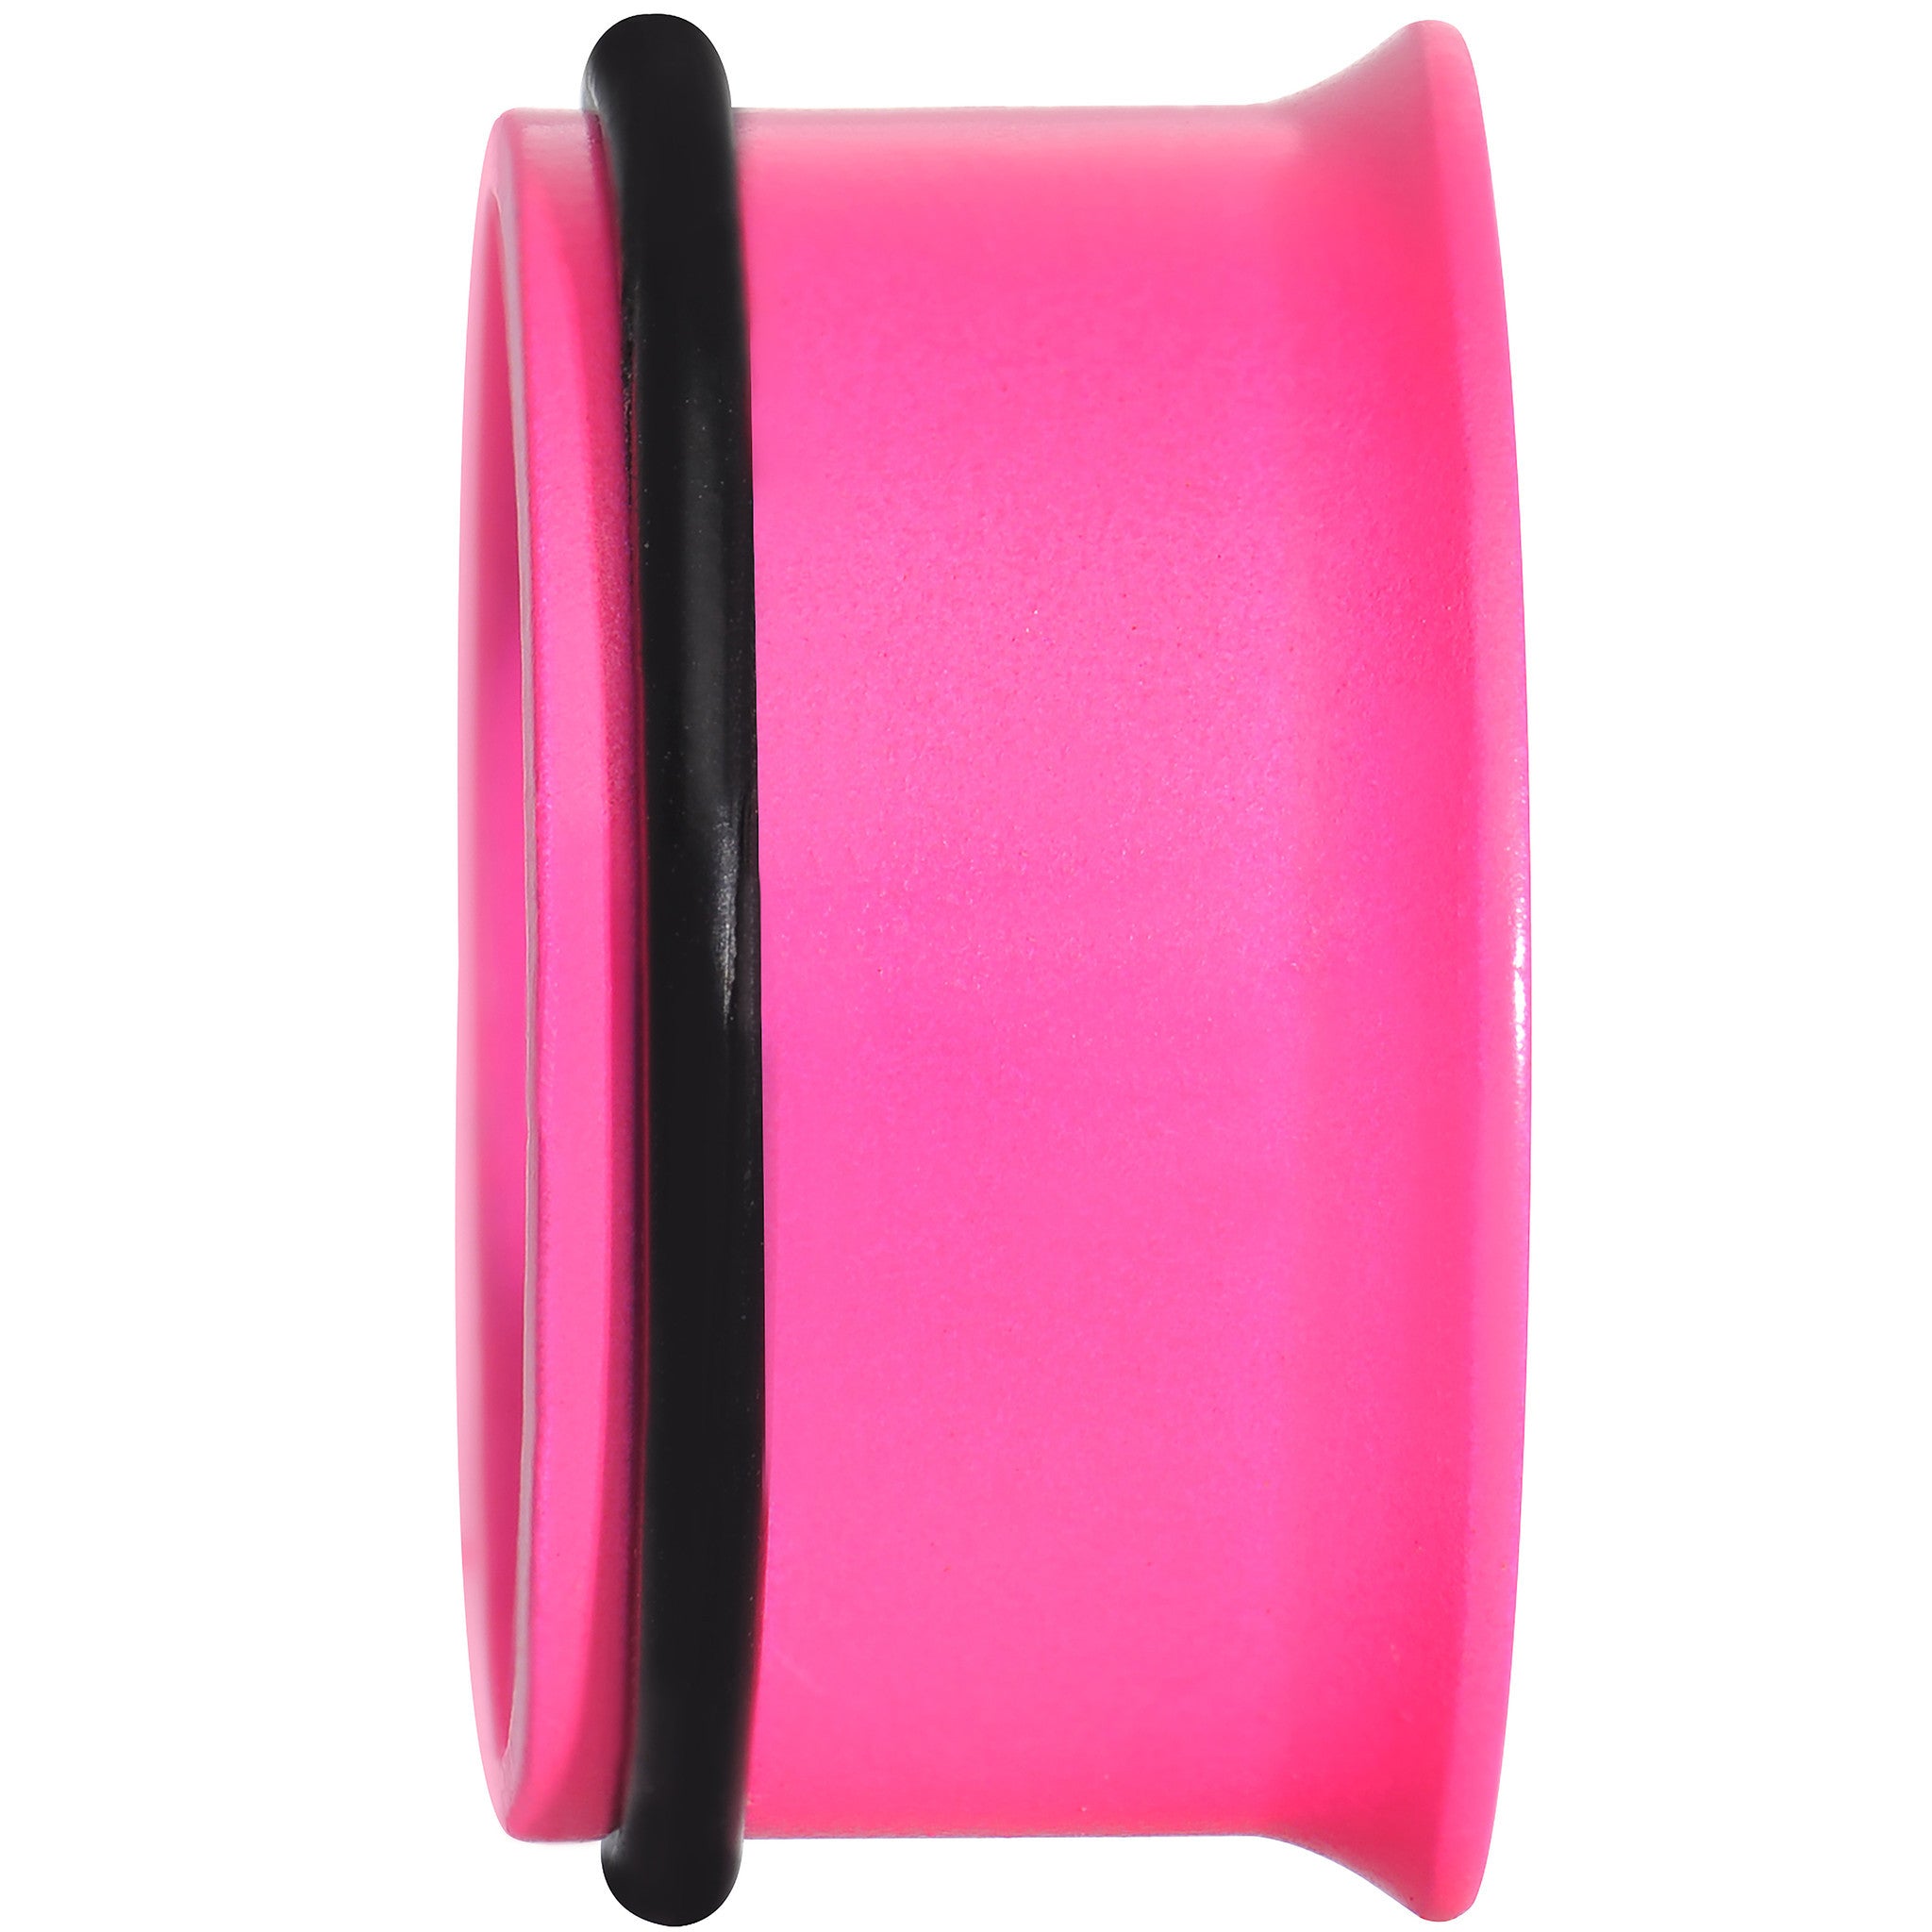 18mm Pink Neon Coated Stainless Steel Single Flare Tunnel Plug